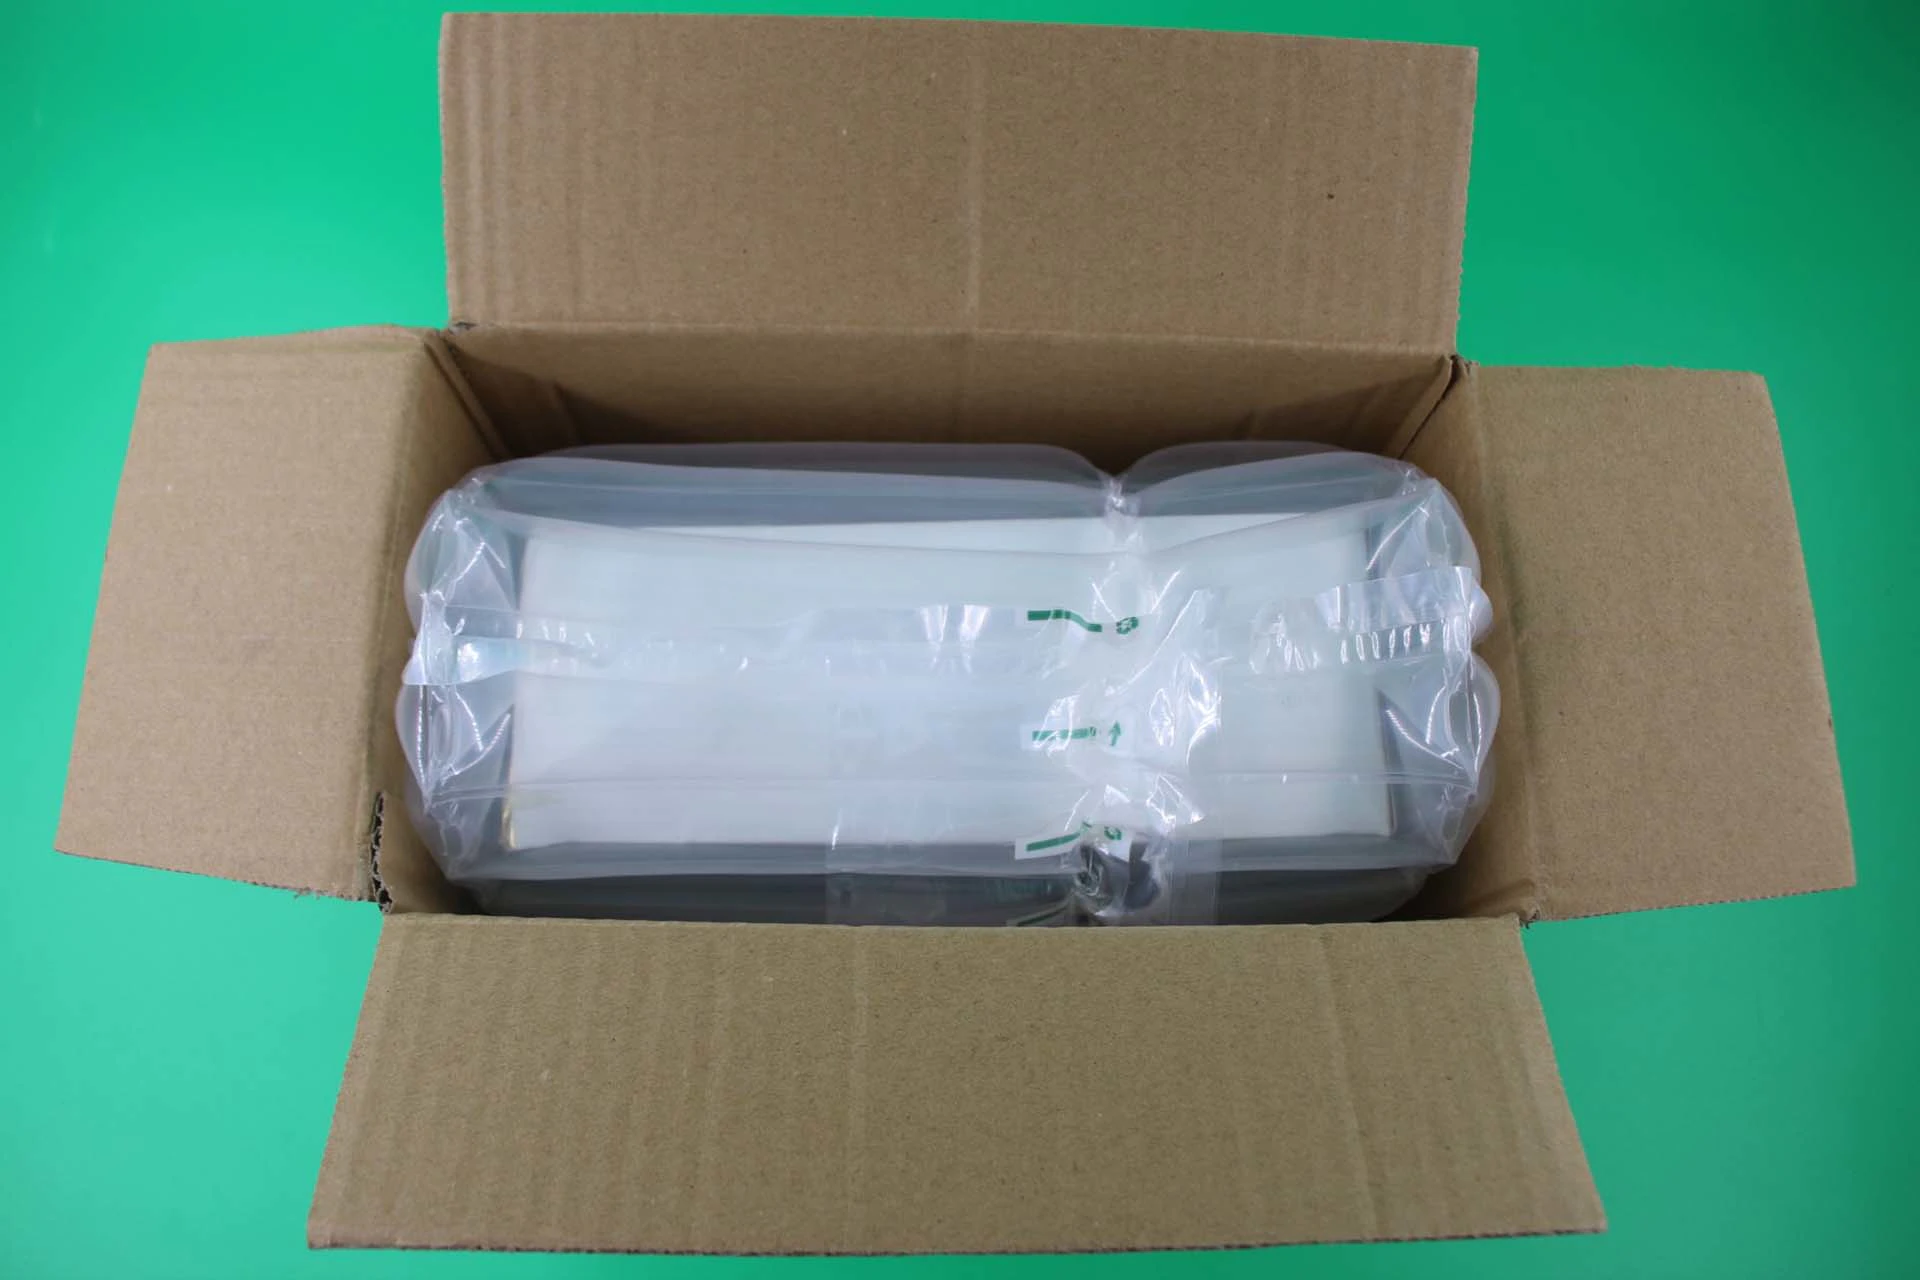 Sunshinepack high-quality packing air bags for delivery